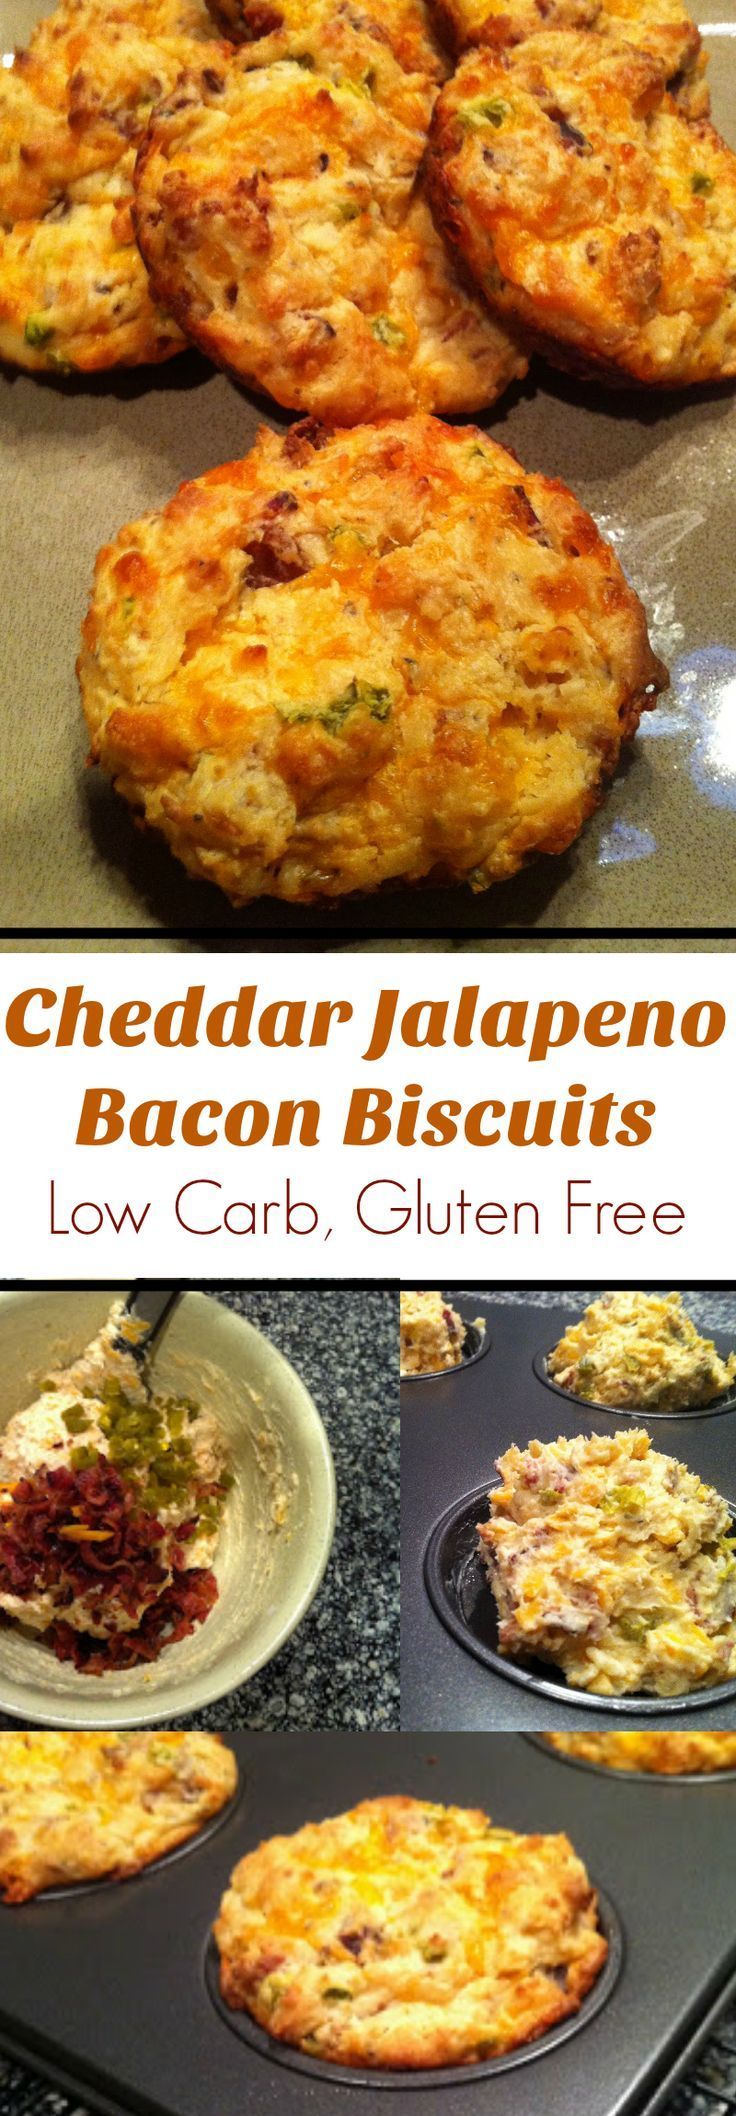 Cheddar Jalapeno Bacon Biscuits – Low Carb, Gluten Free | Peace Love and Low Carb